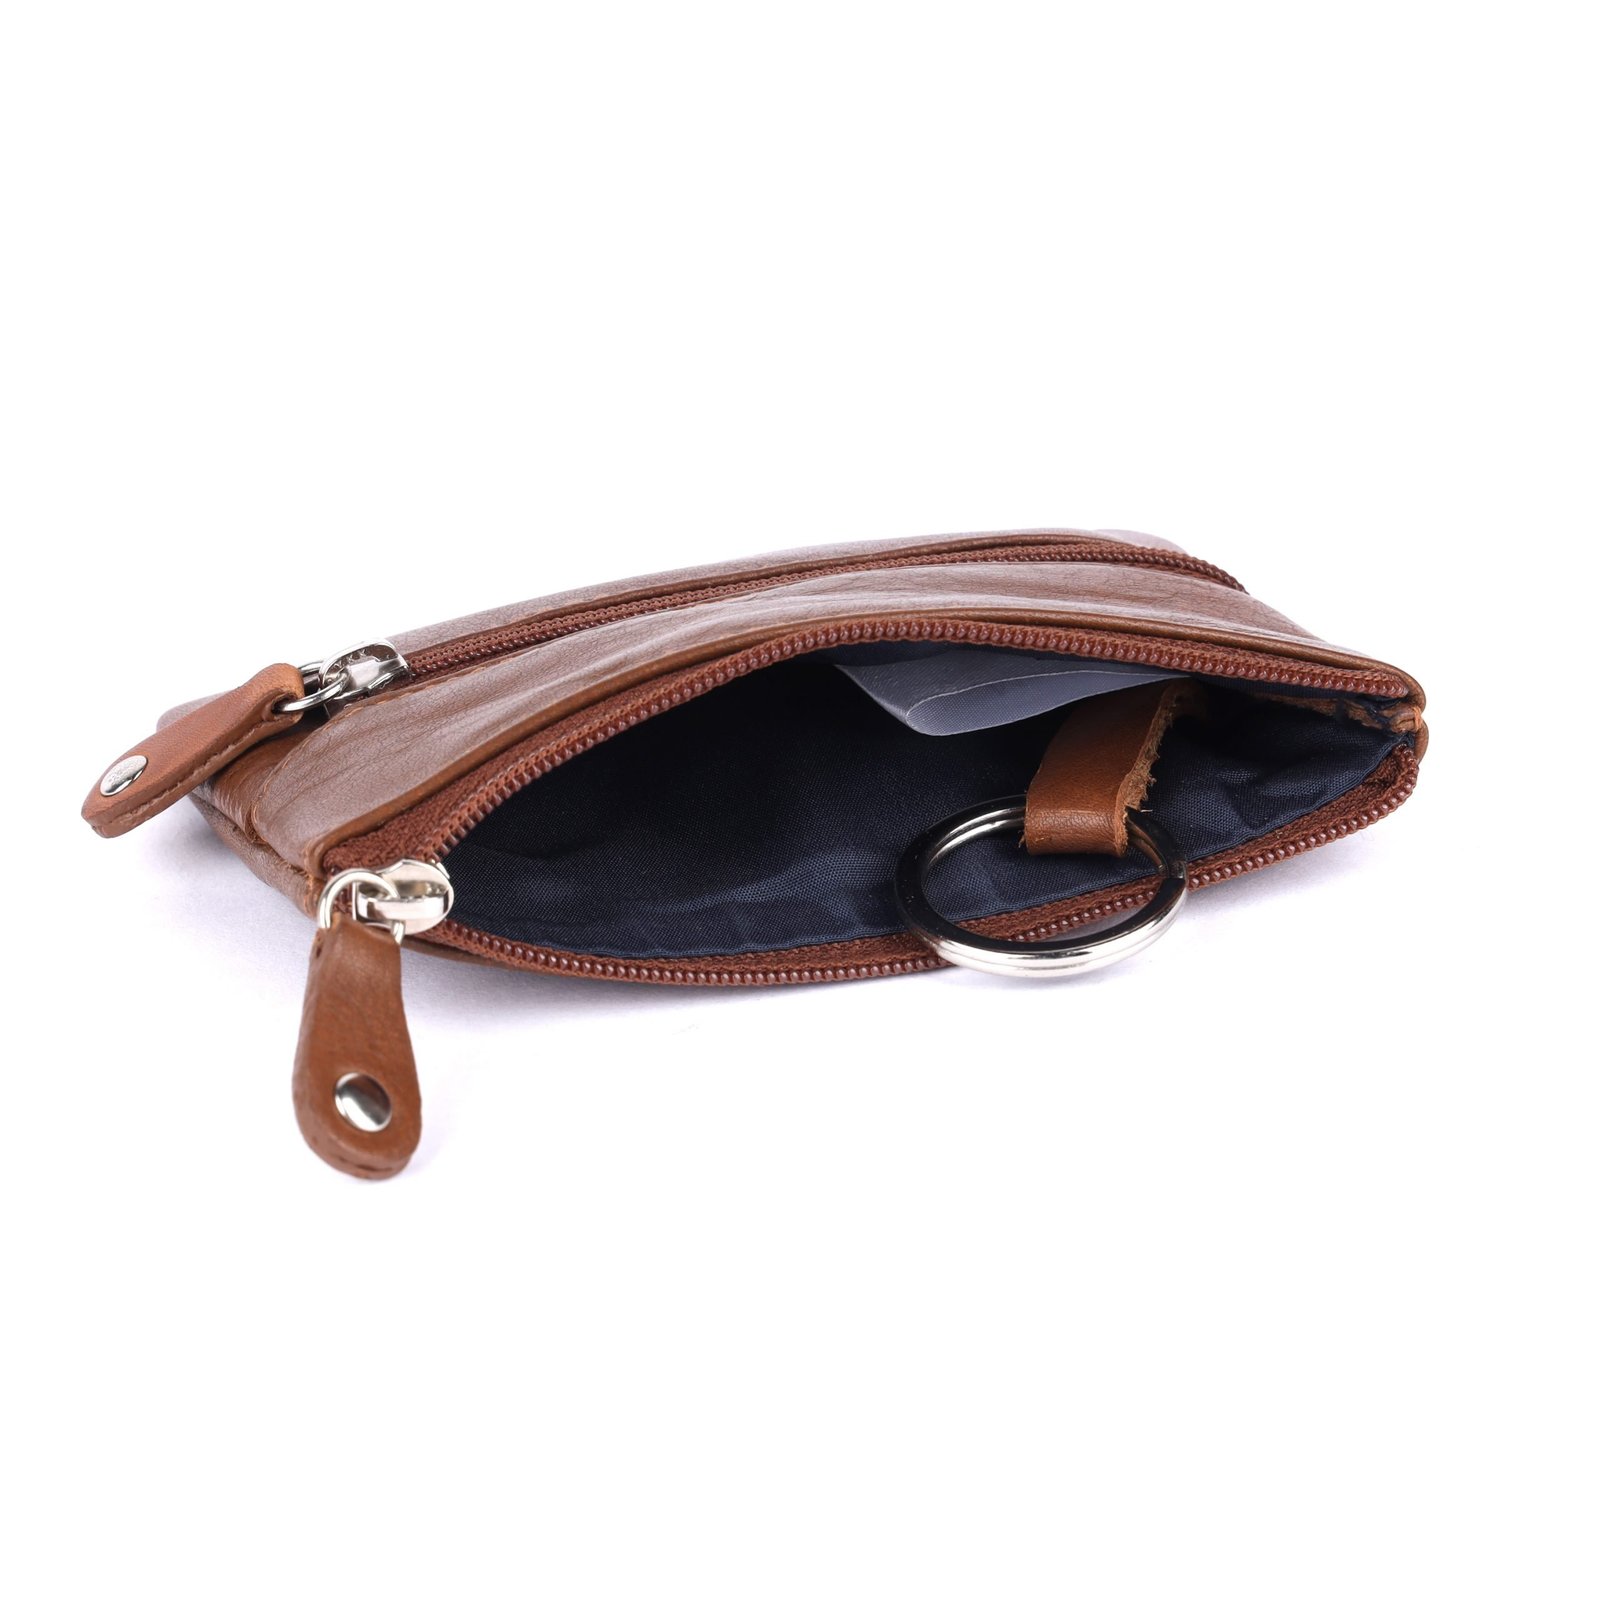 👜 Bitsy Leather Key pouch - Slideup Leather Bags Australia